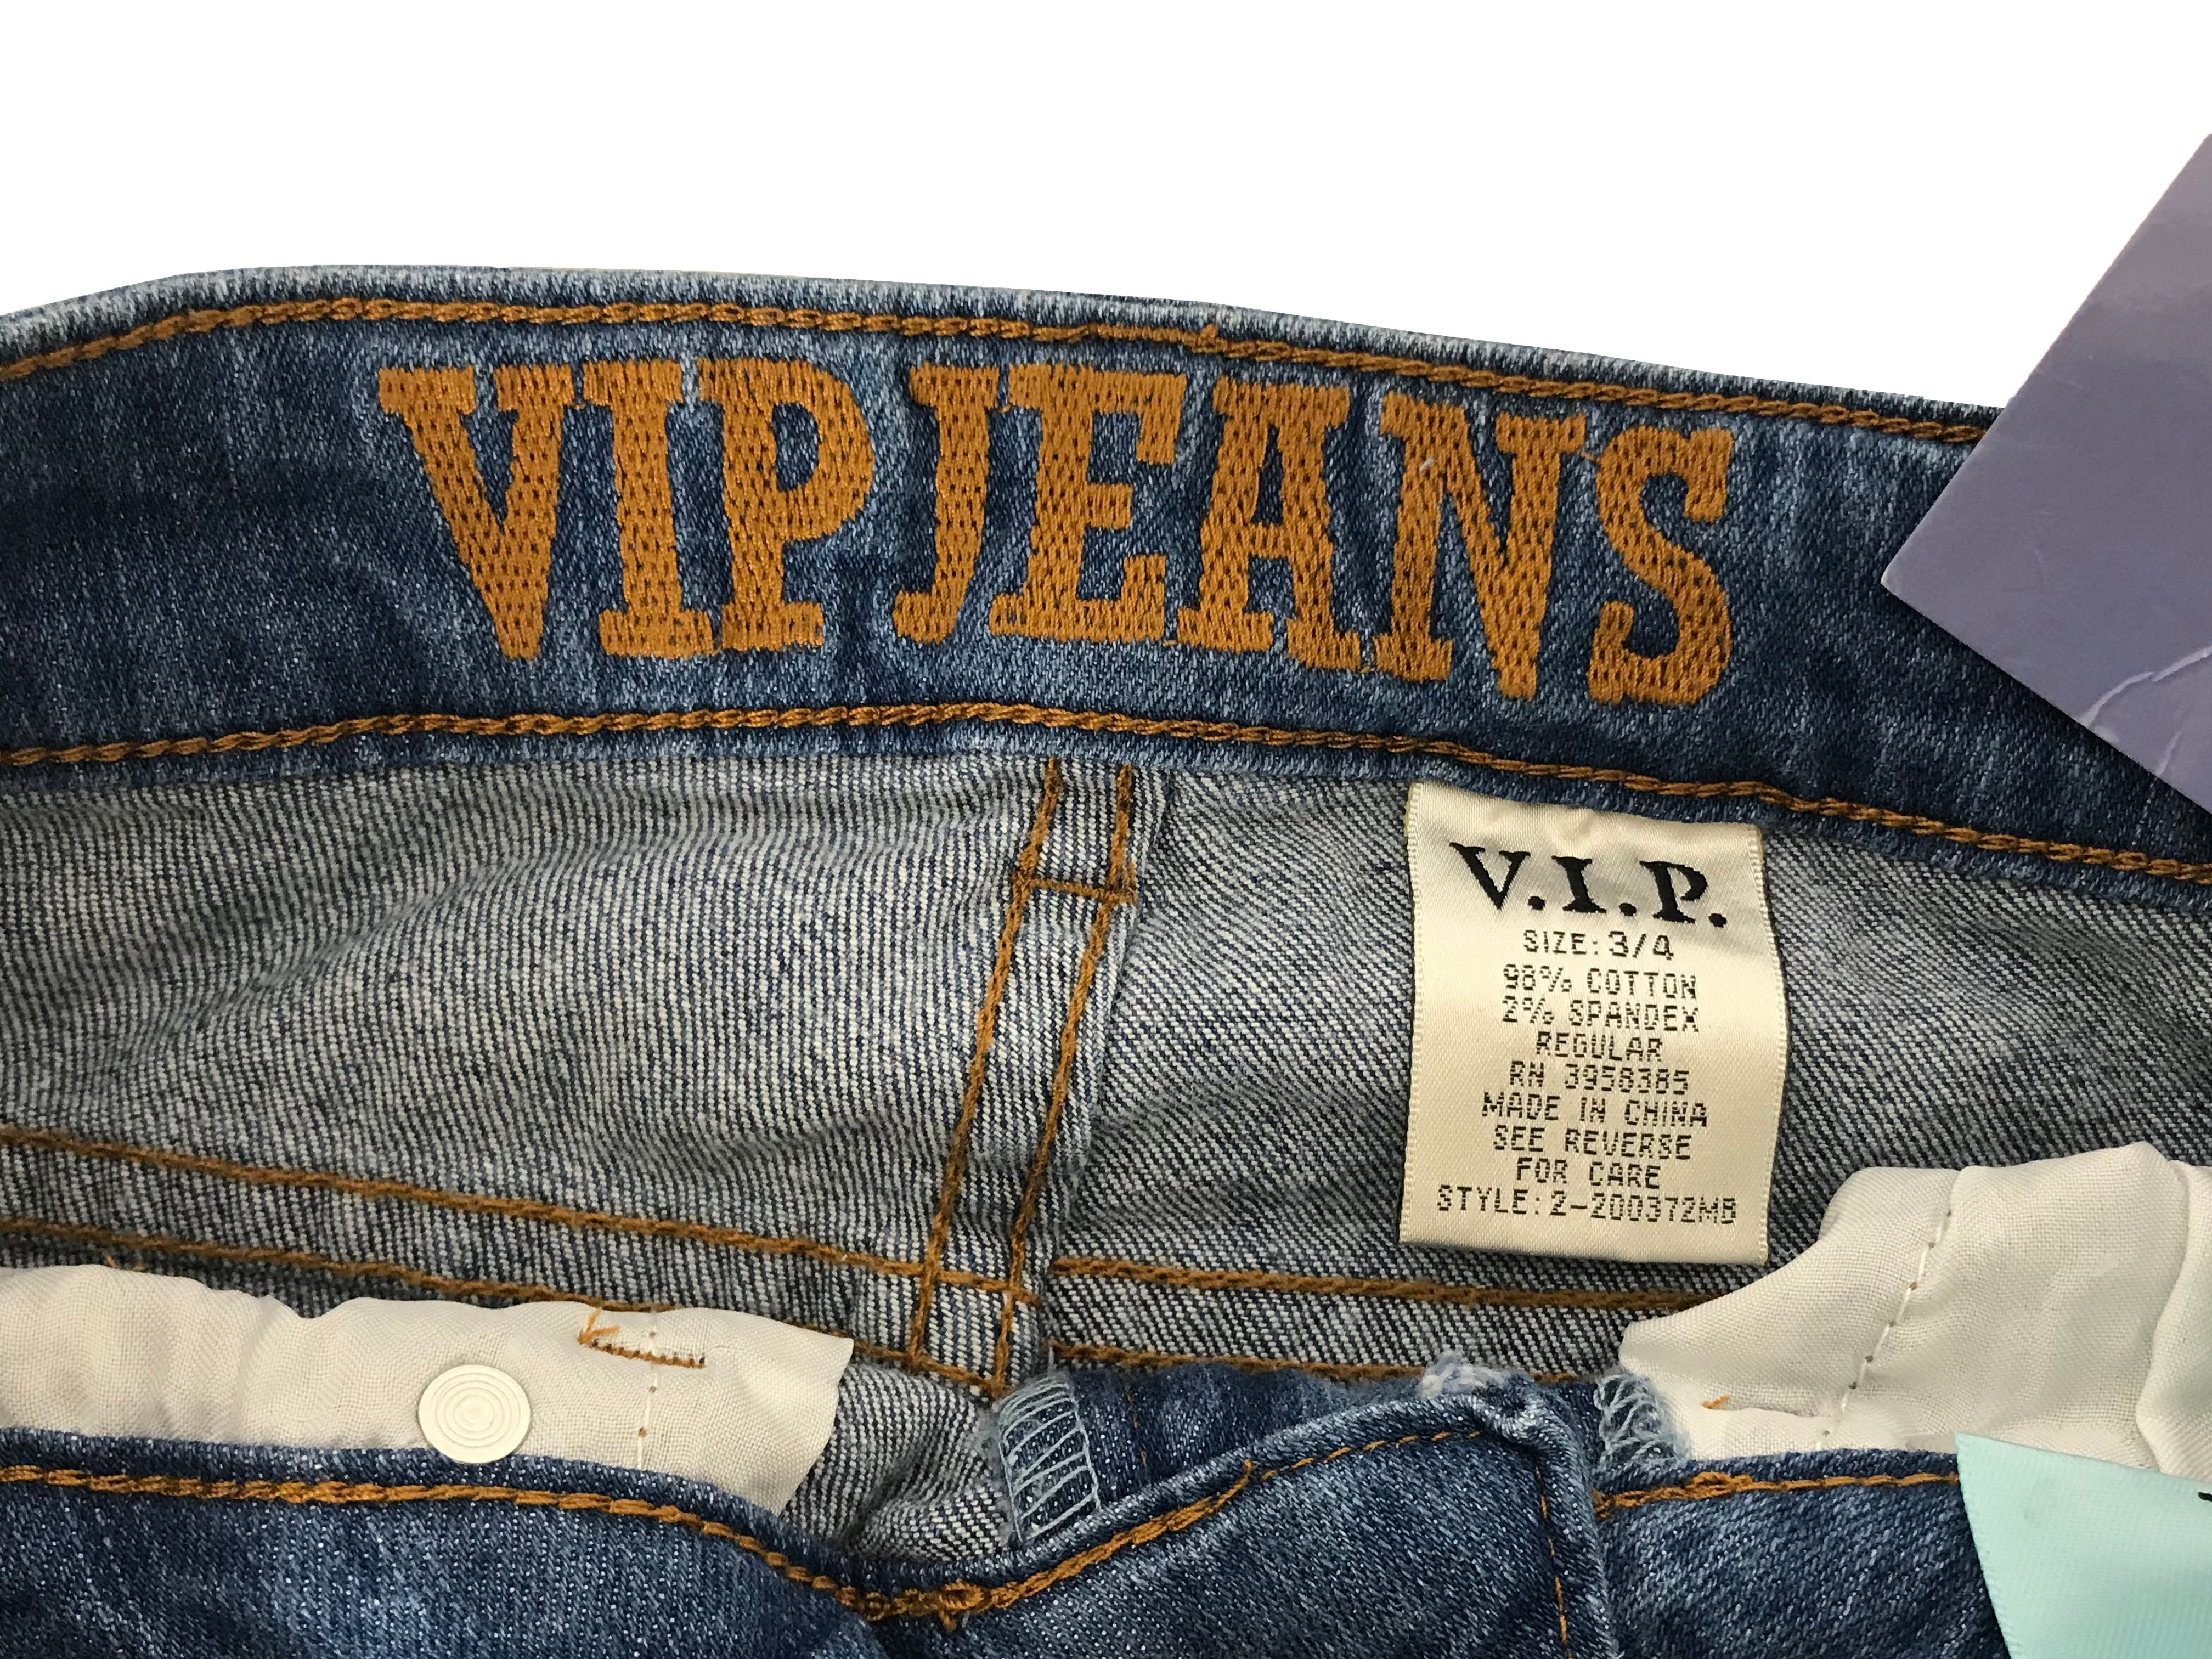 VIP Distressed Skinny Jeans Women's Size 3/4